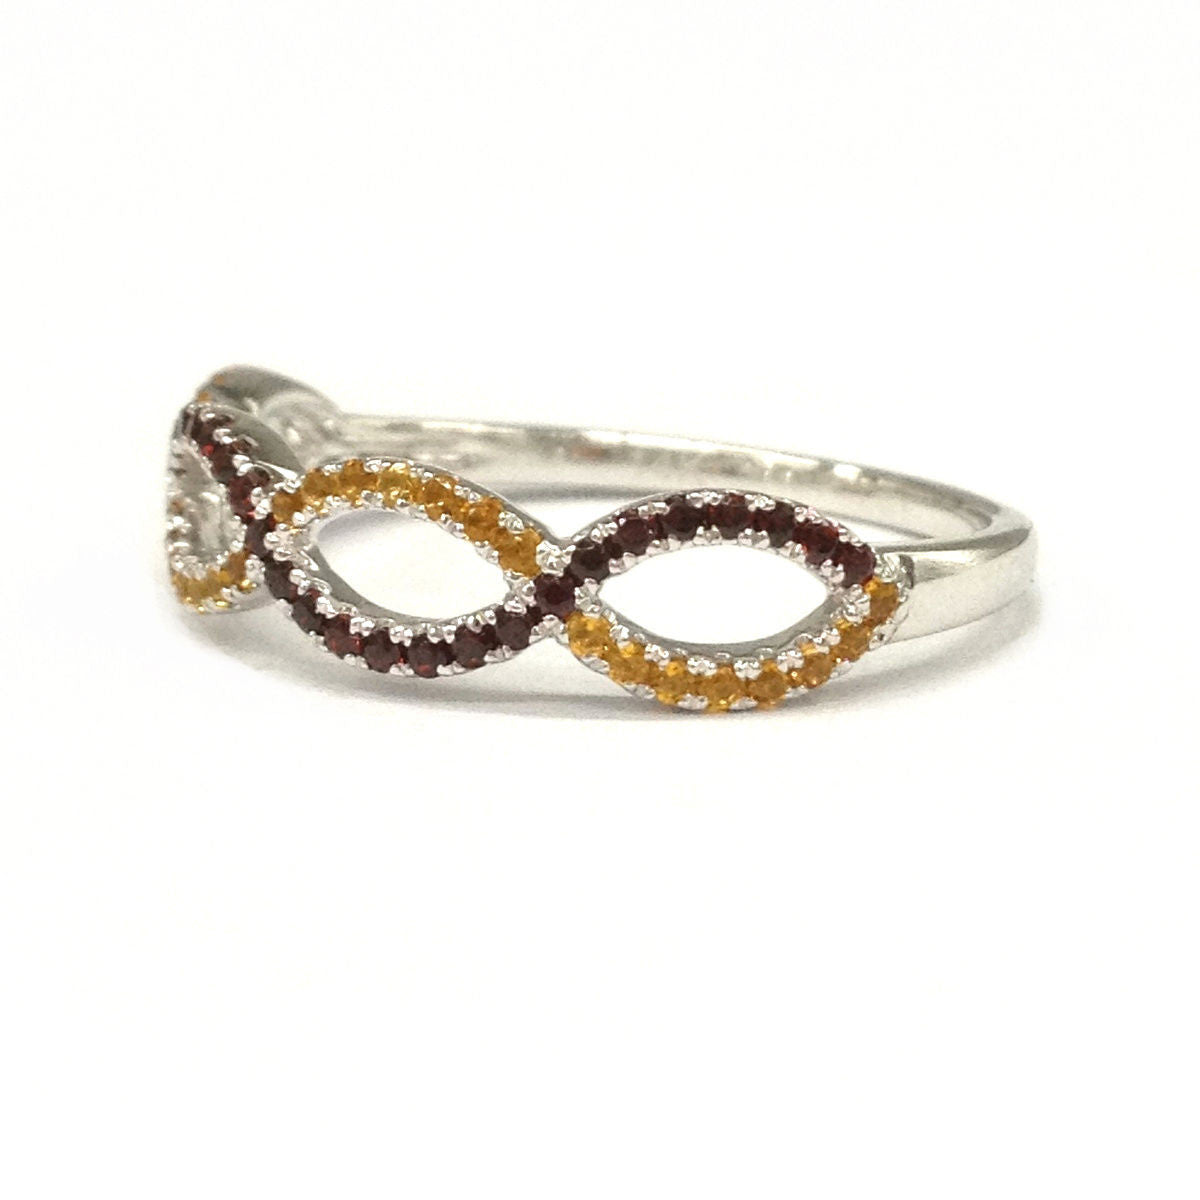 Red Garnet & Yellow Citrine Wedding Band Half Eternity Anniversary Ring 14K White Gold Curved - Lord of Gem Rings - 4